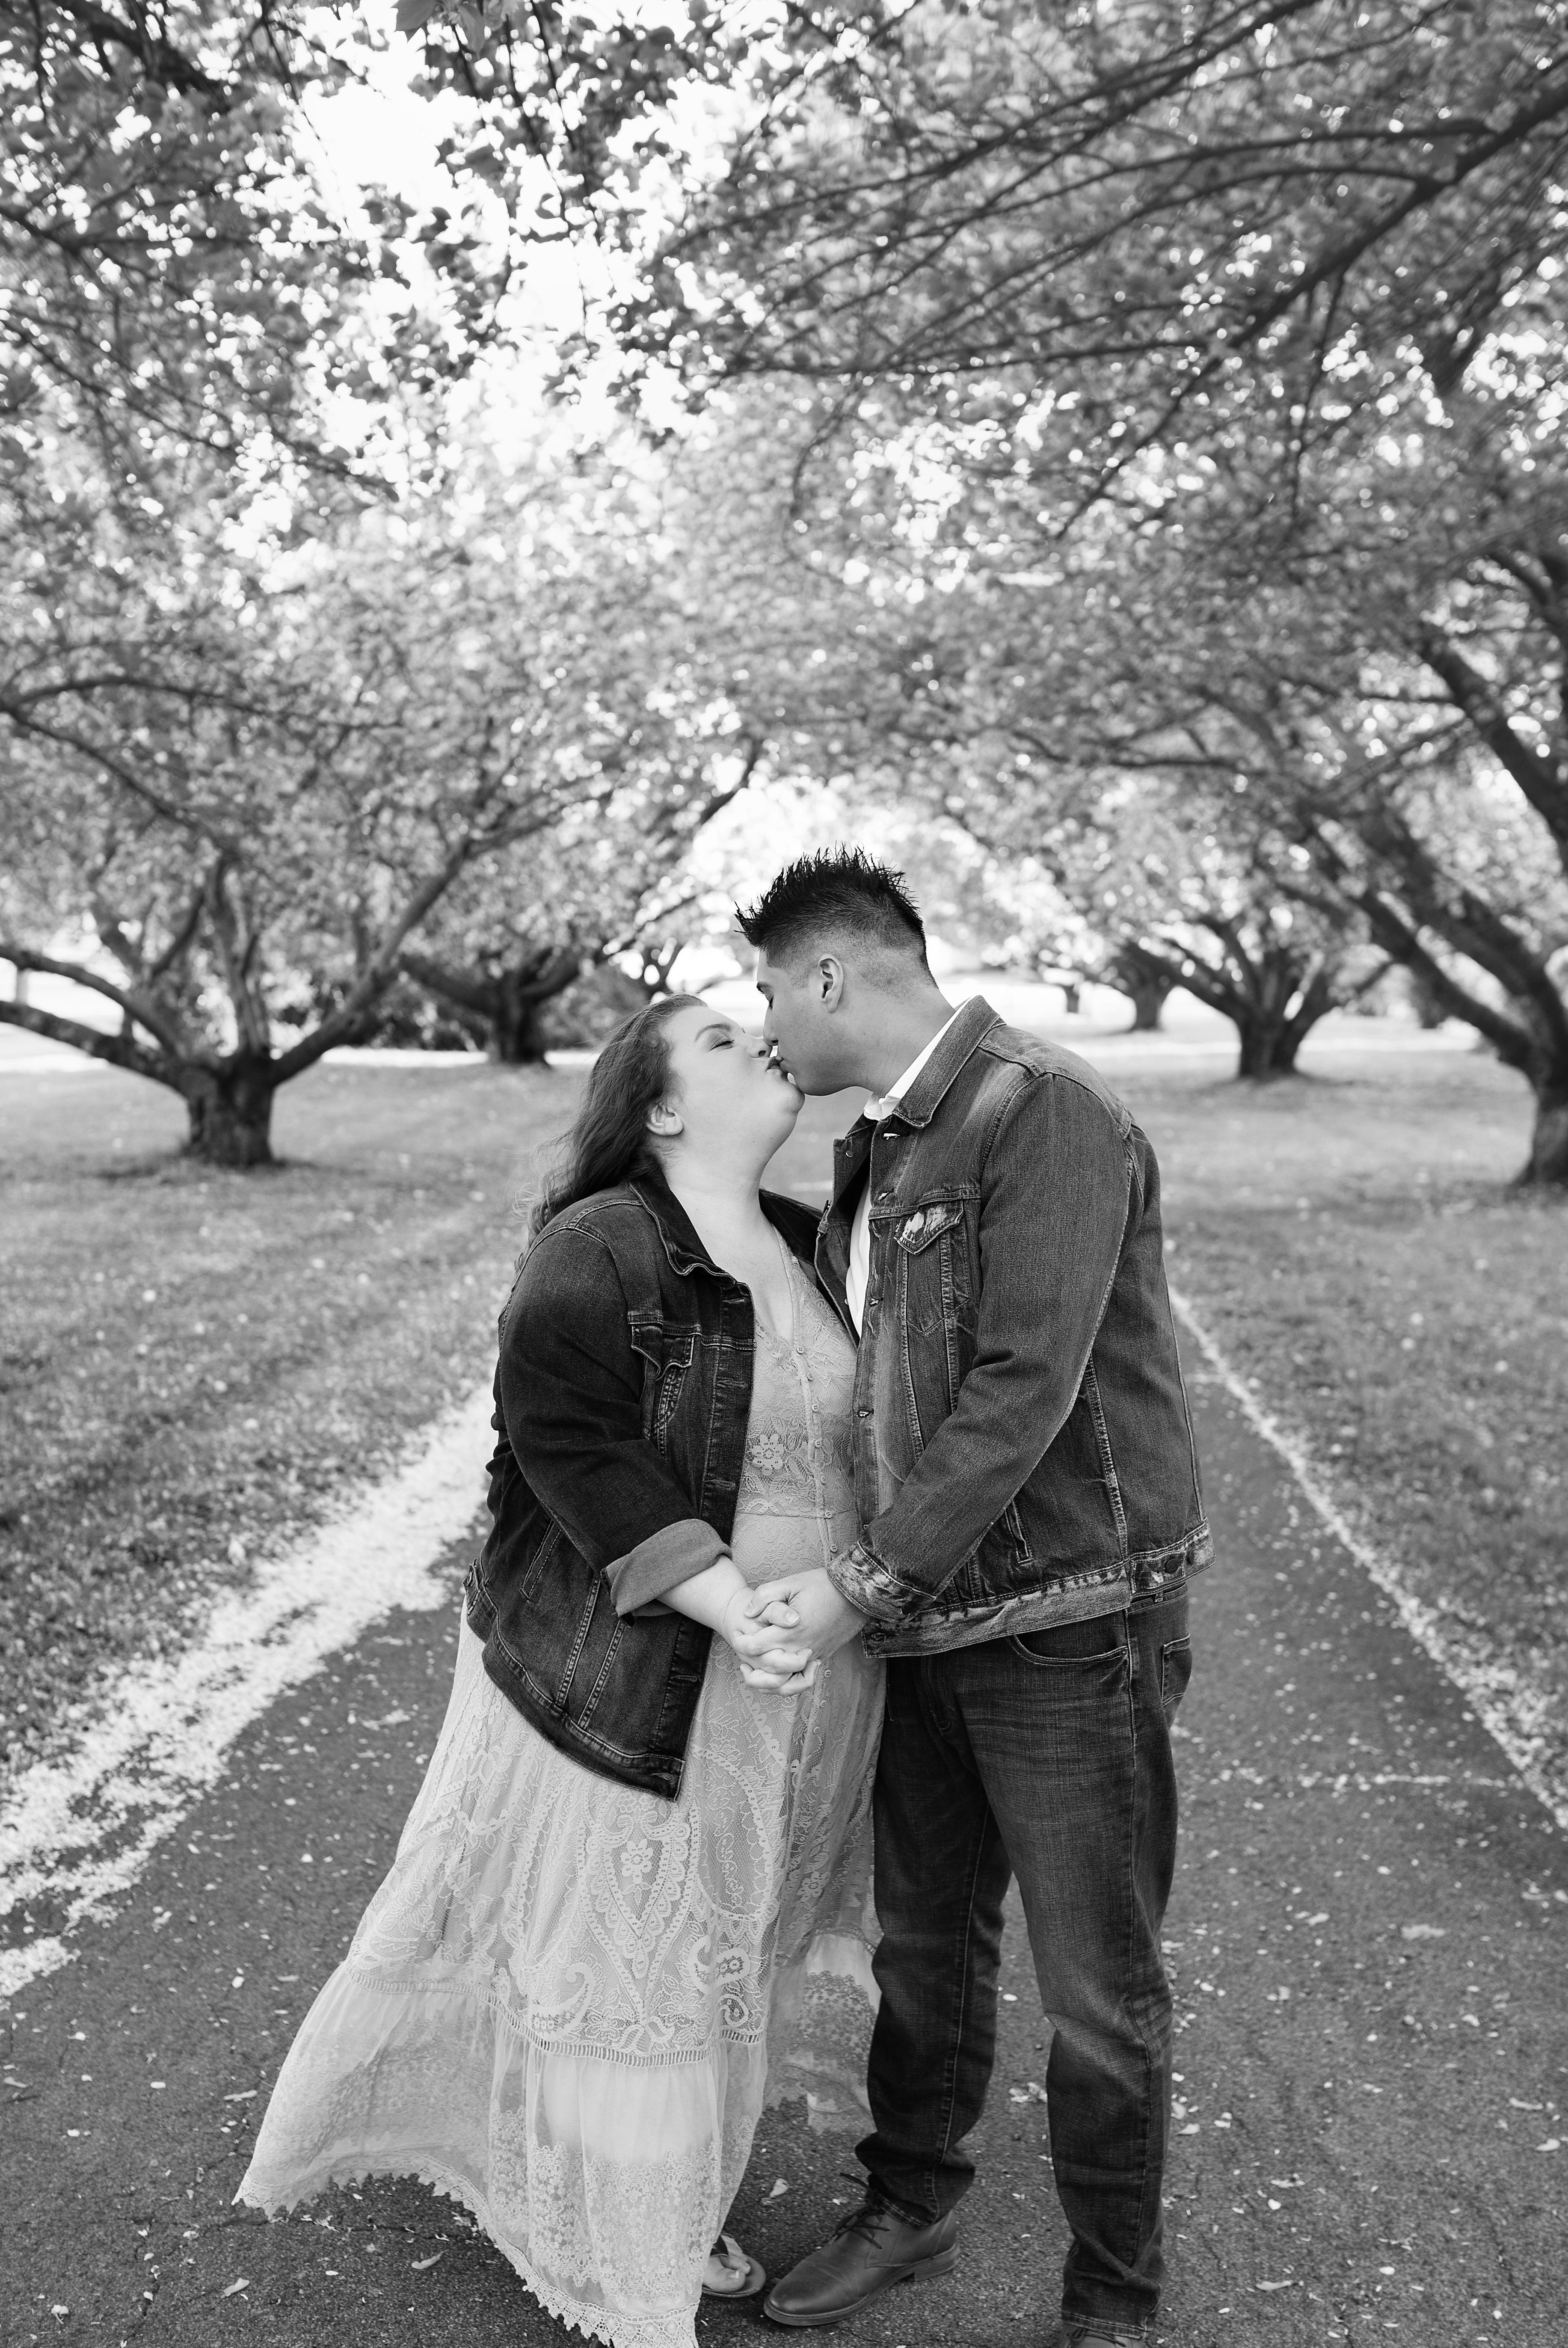 The Wedding Website of Carrie Spicer and Dave Delao